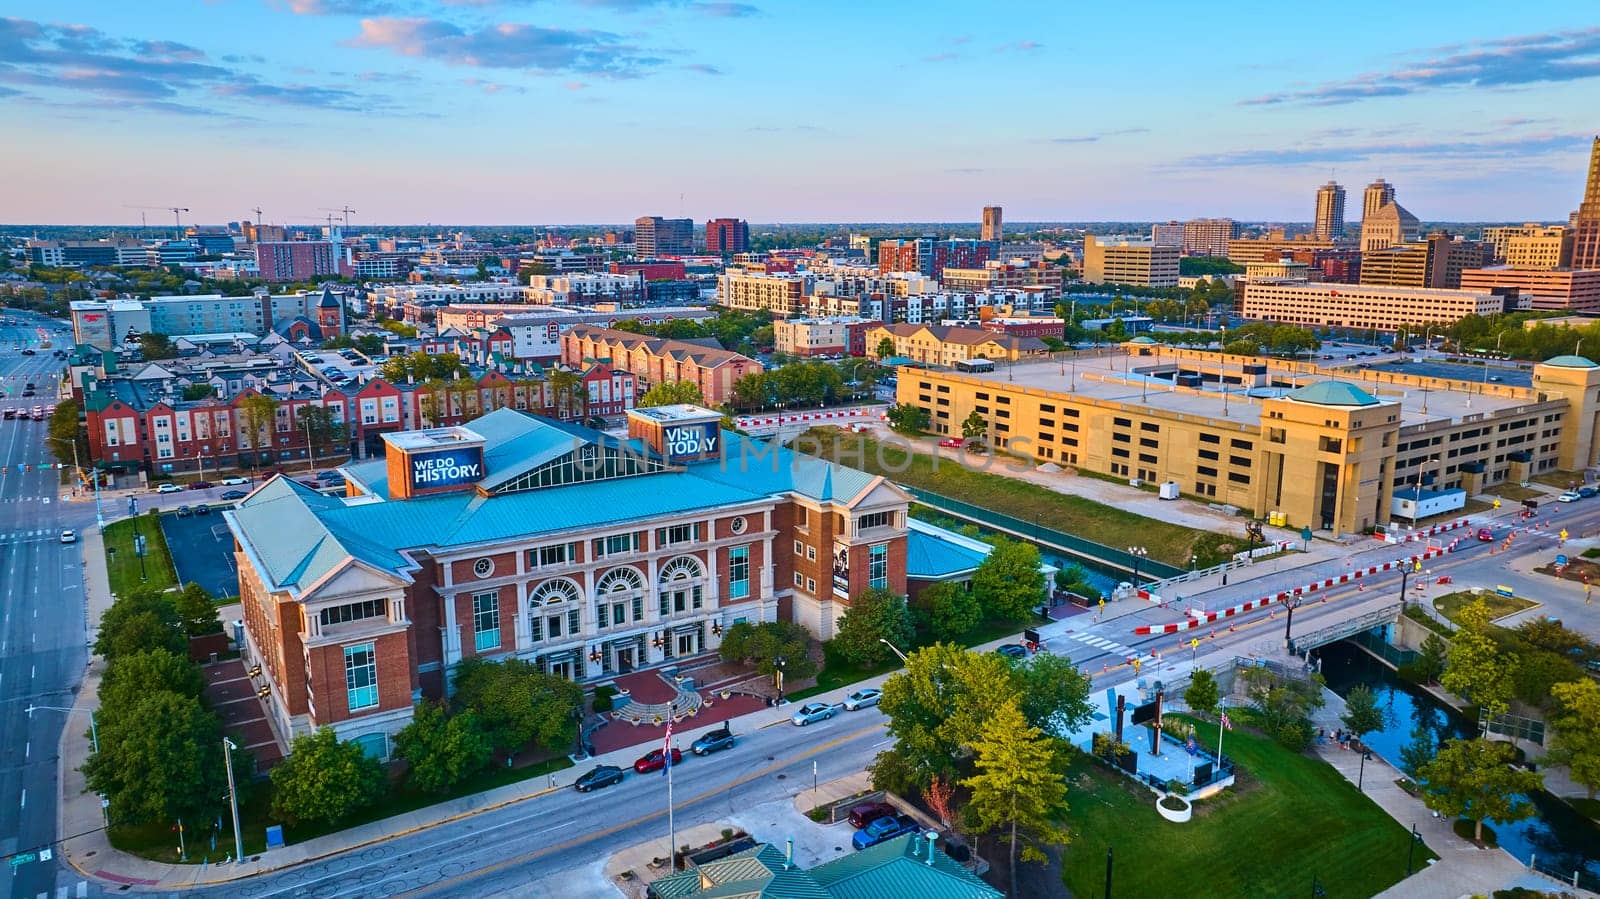 Sunset over Indianapolis in 2023, featuring the 'We Do History' cultural institution, residential and commercial buildings, and a bustling cityscape, captured via drone.